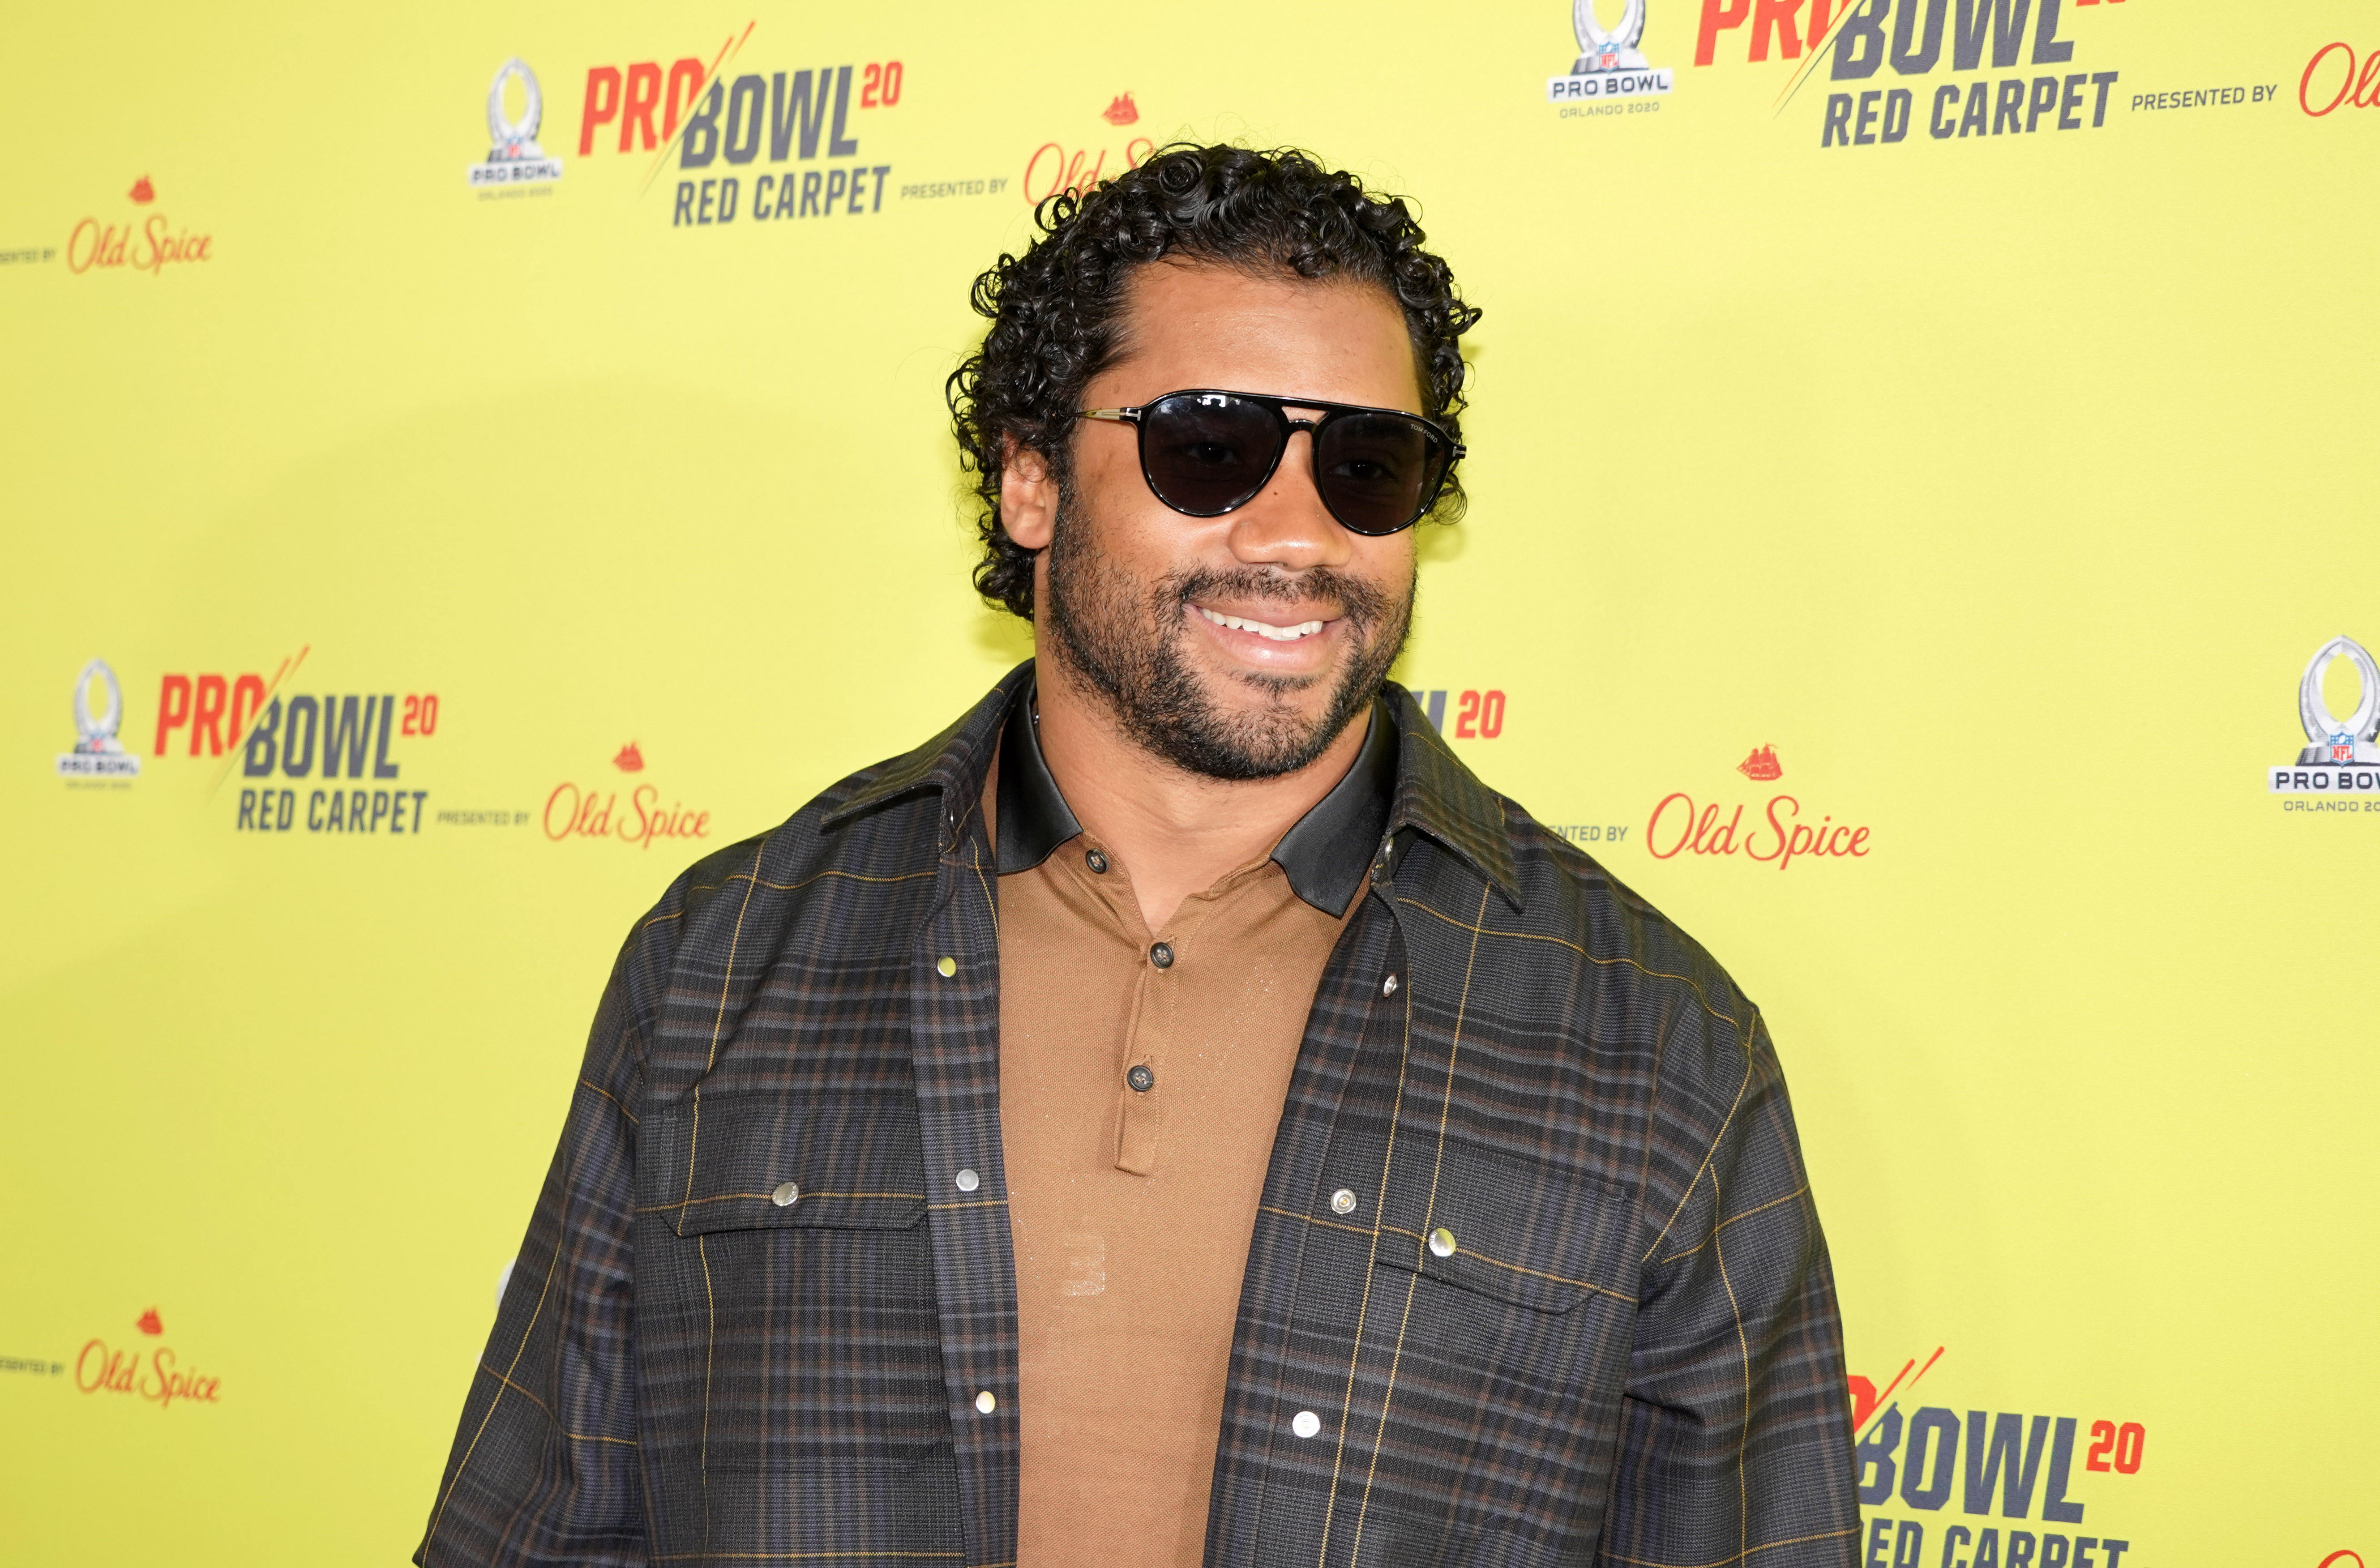 Russell Wilson 'would love' to have Seahawks sign Antonio Brown (Report)